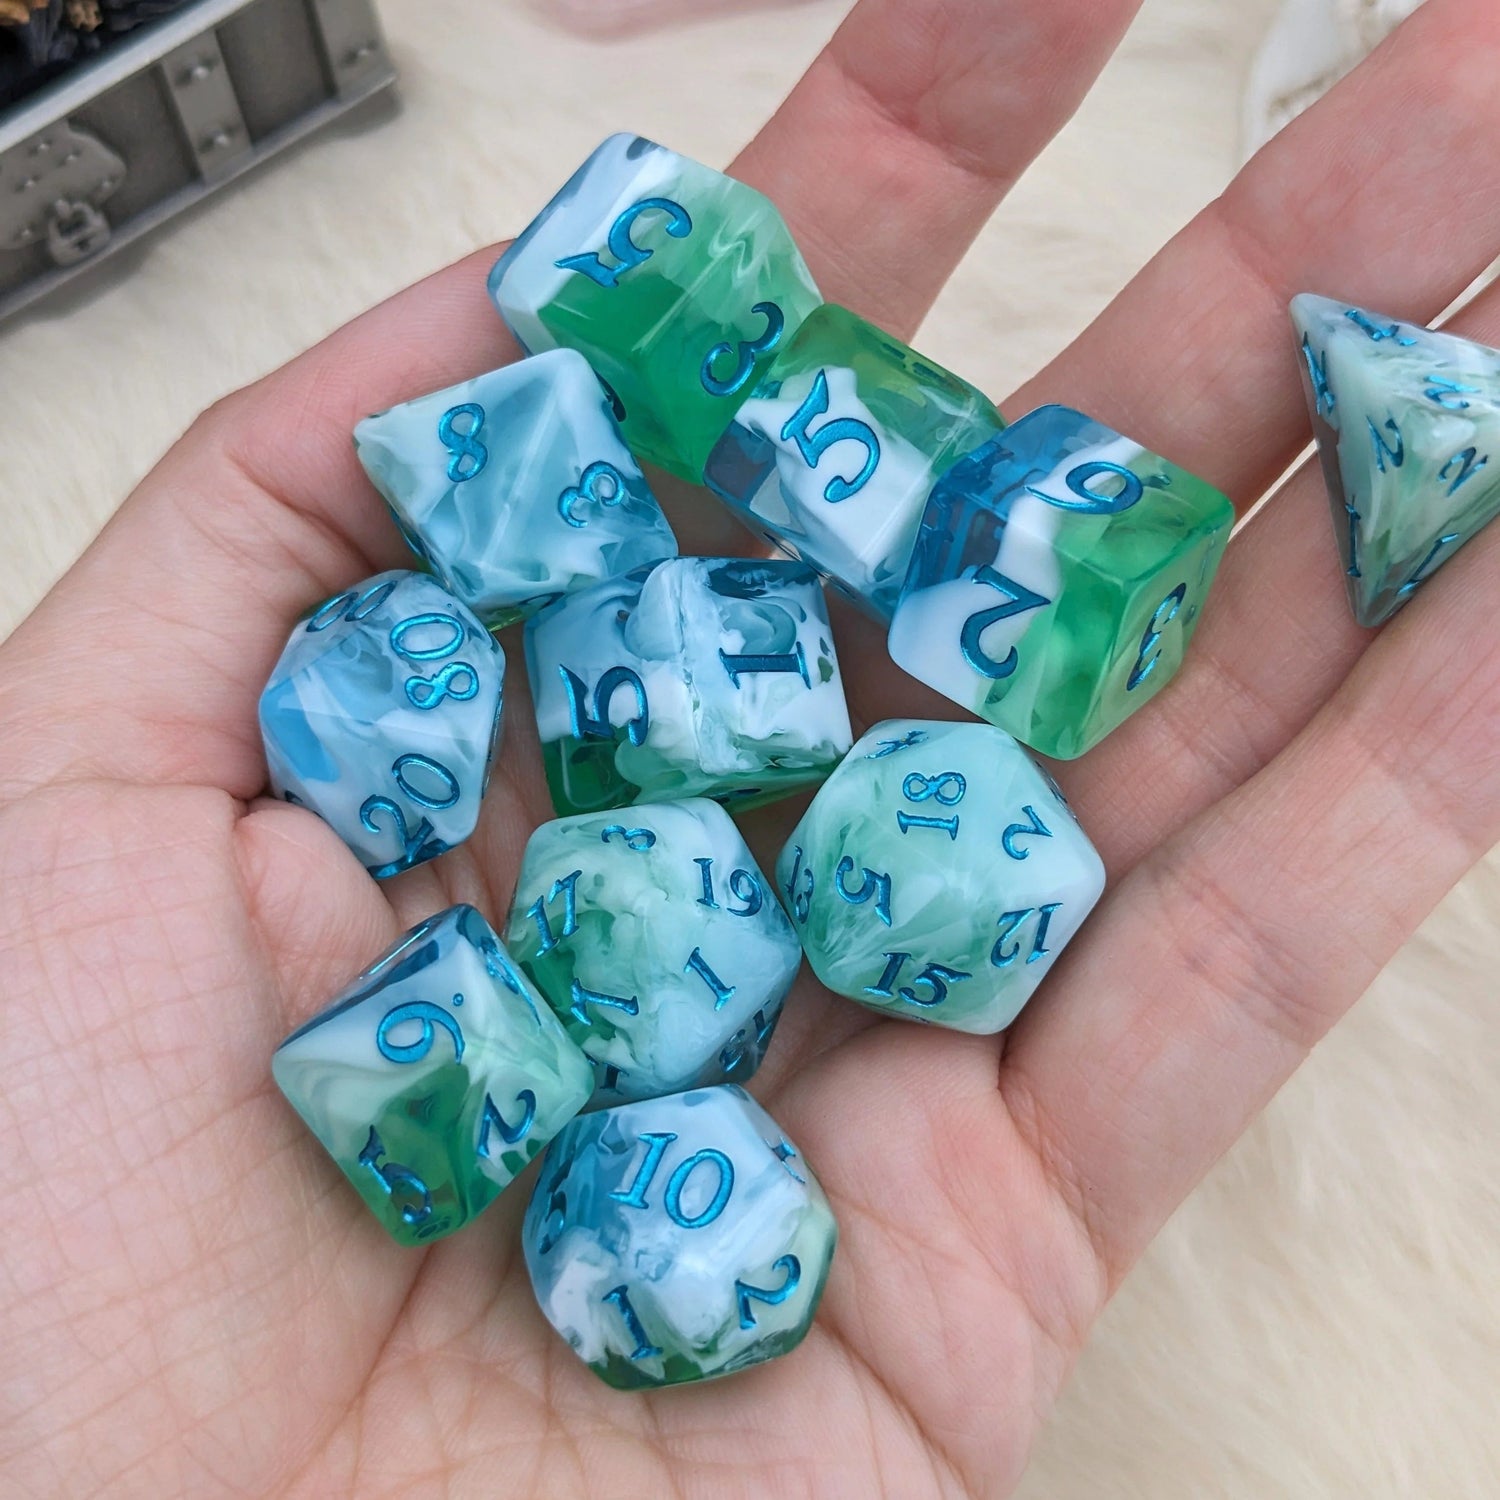 Tidecaller - 7 Dice Set - The Fourth Place